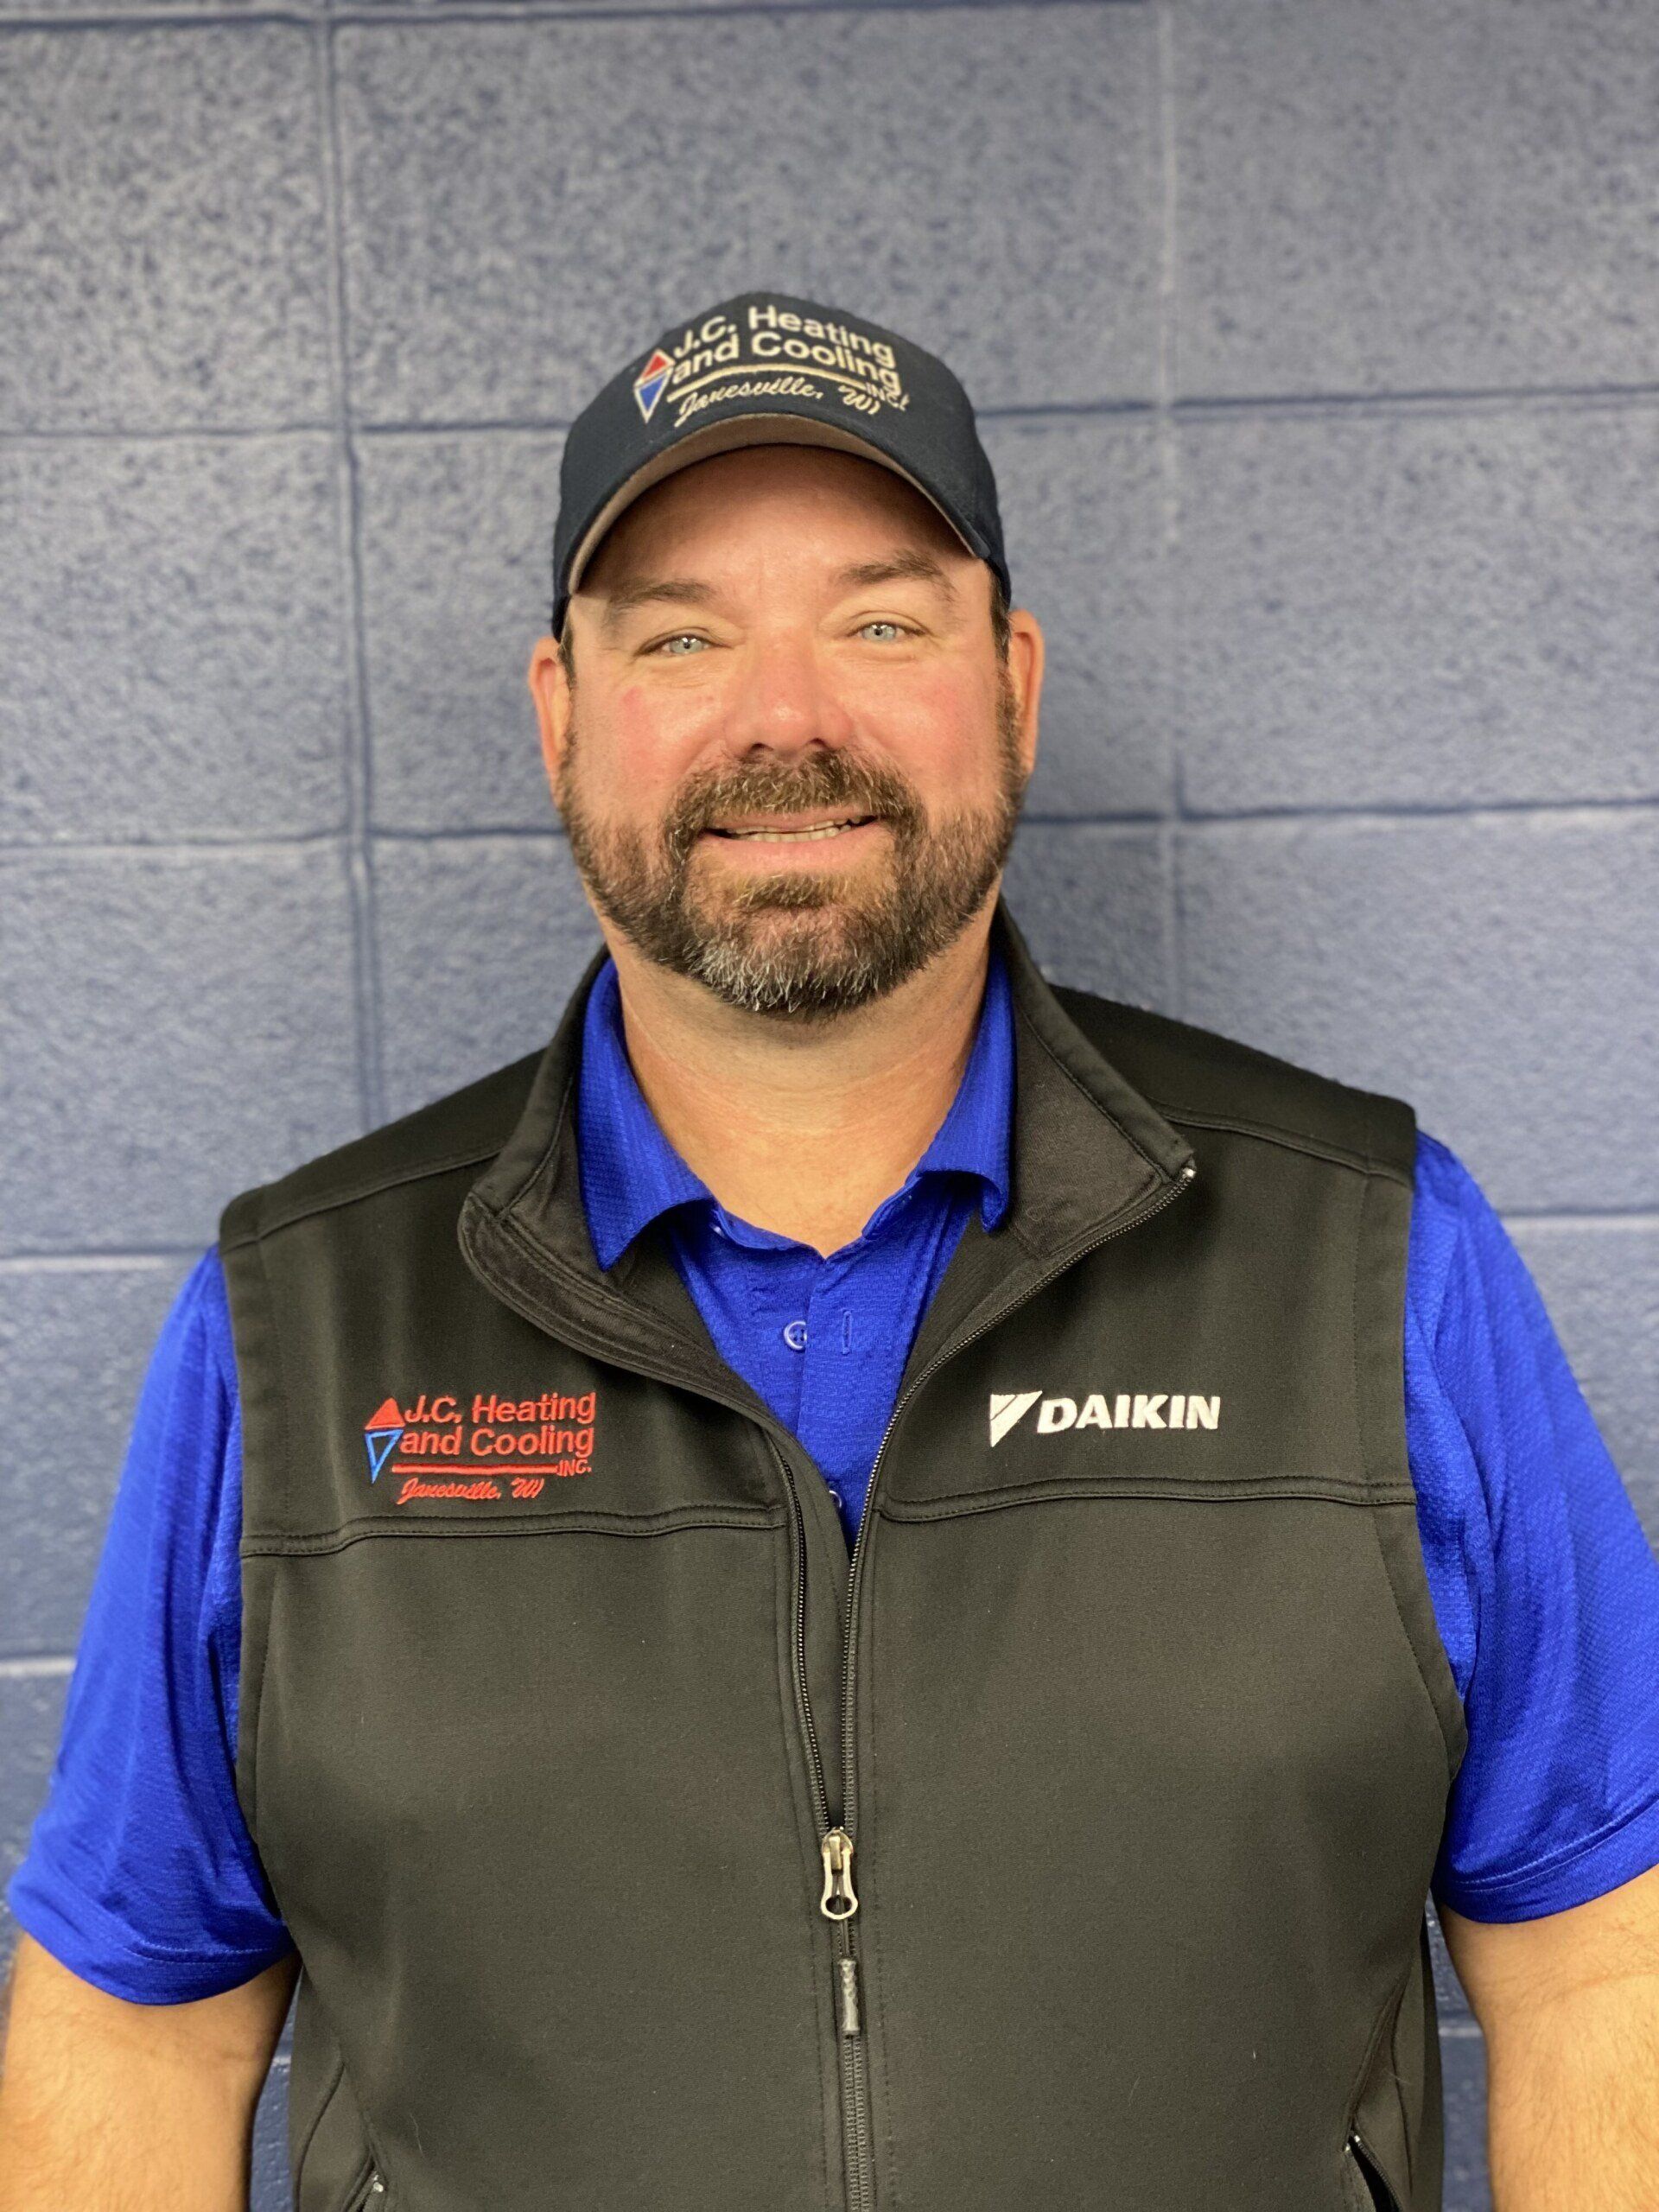 Jason — Janesville, WI — J.C. Heating and Cooling, Inc.